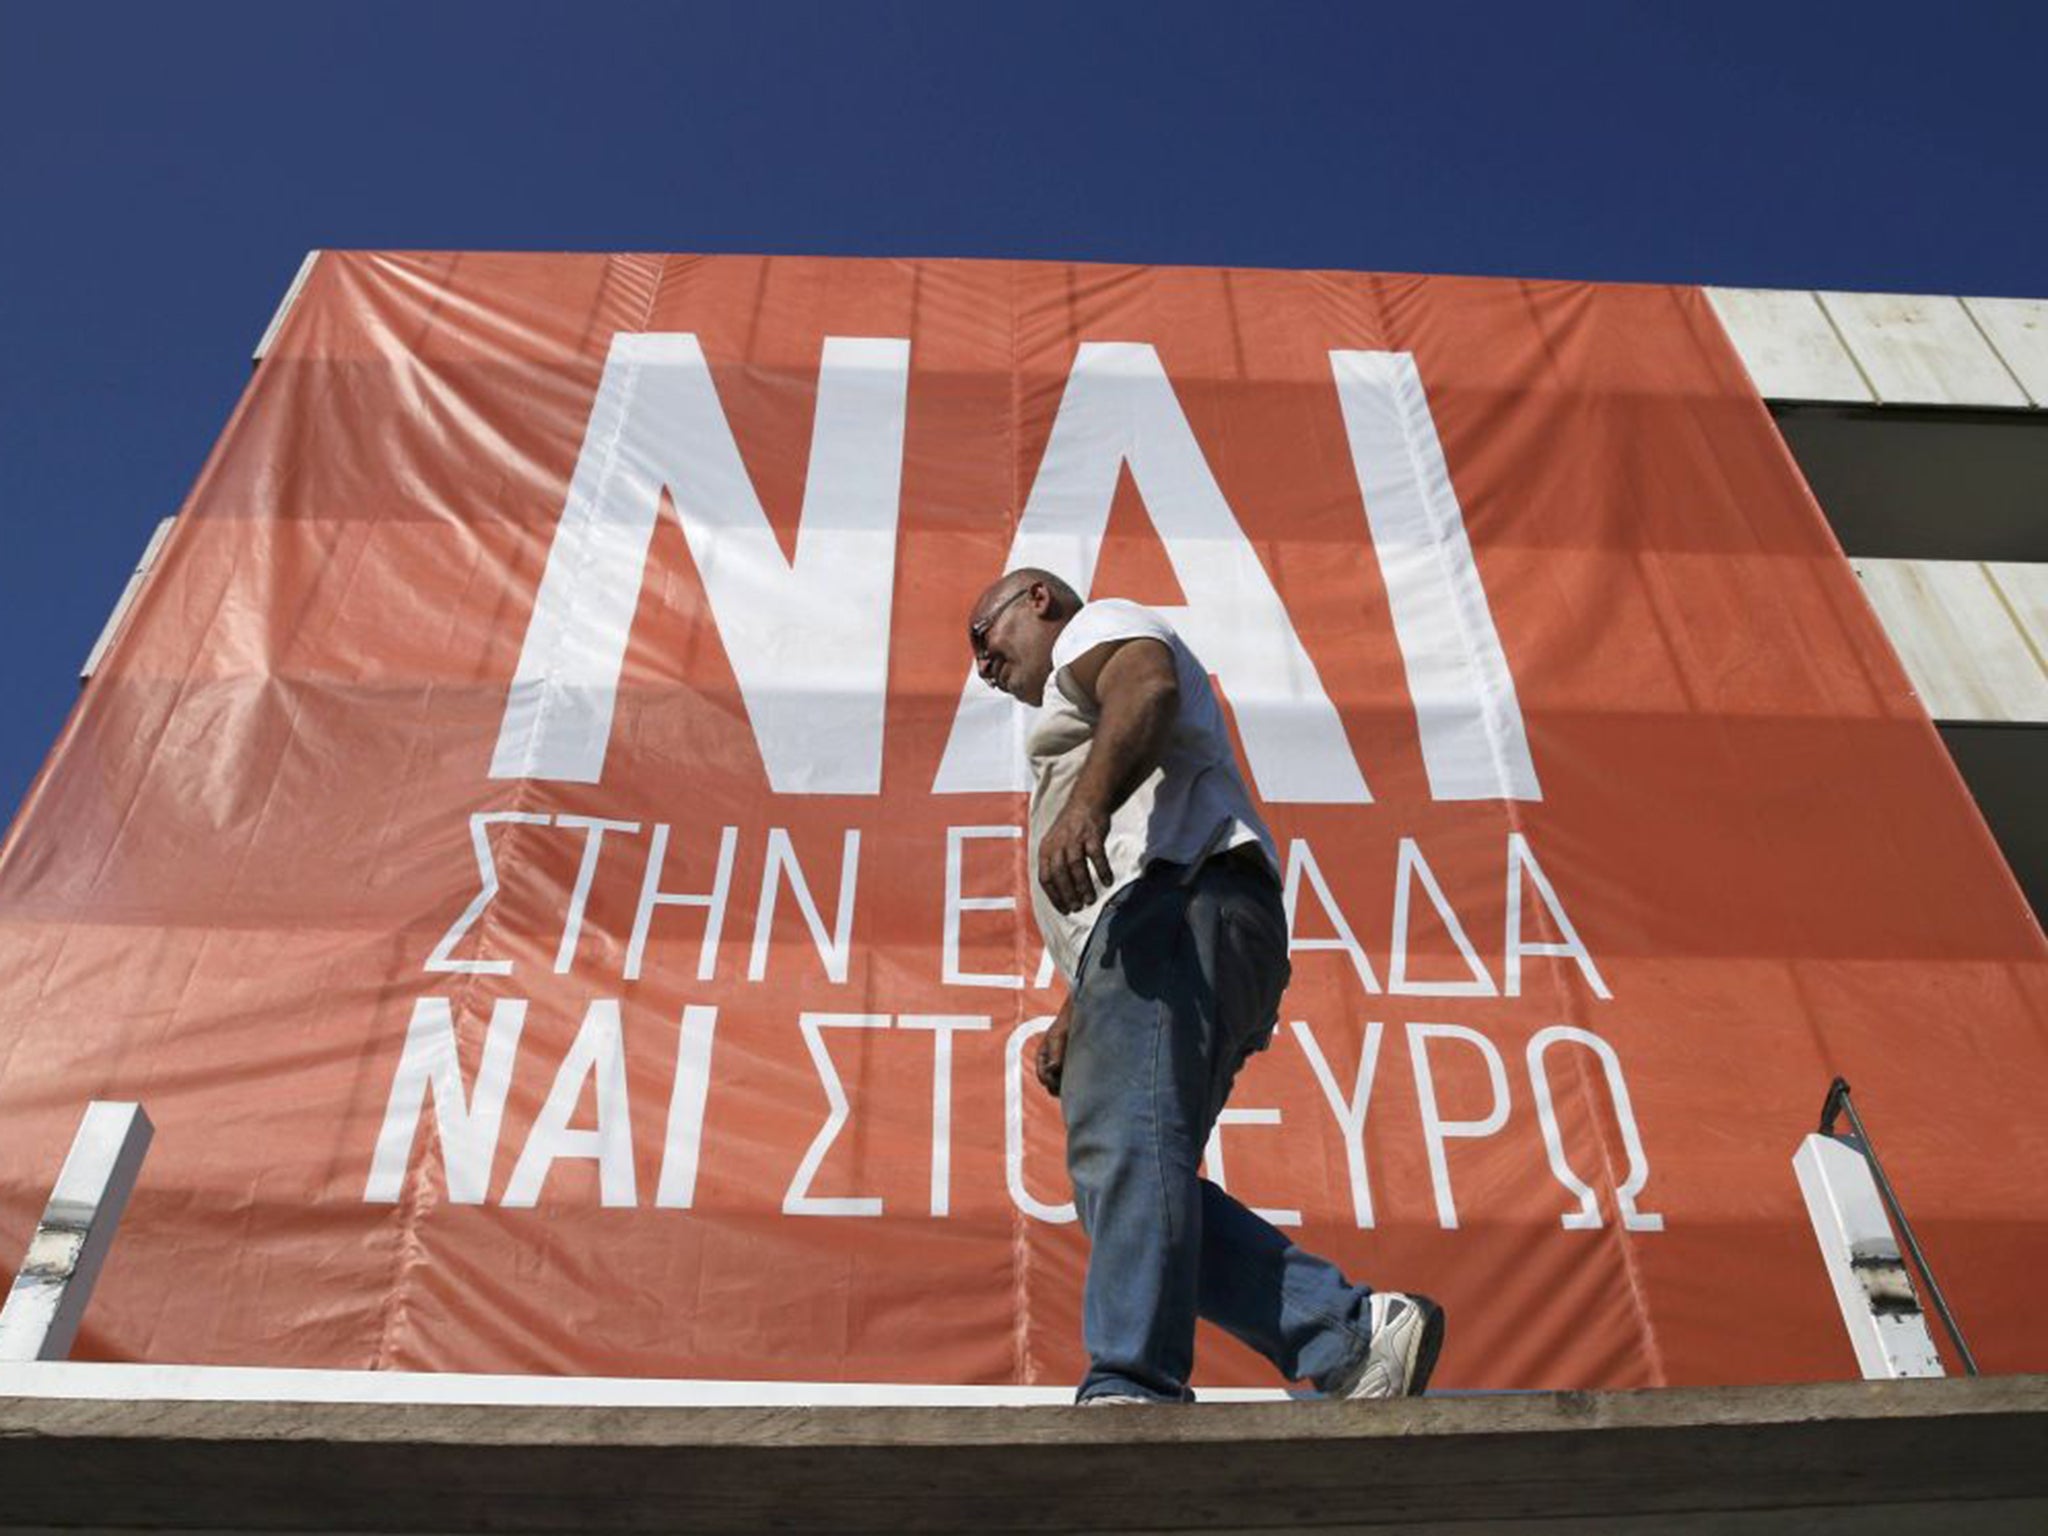 Opposition parties to Syriza, including the centre-right New Democracy, are campaigning for a ‘Yes’ vote in the referendum